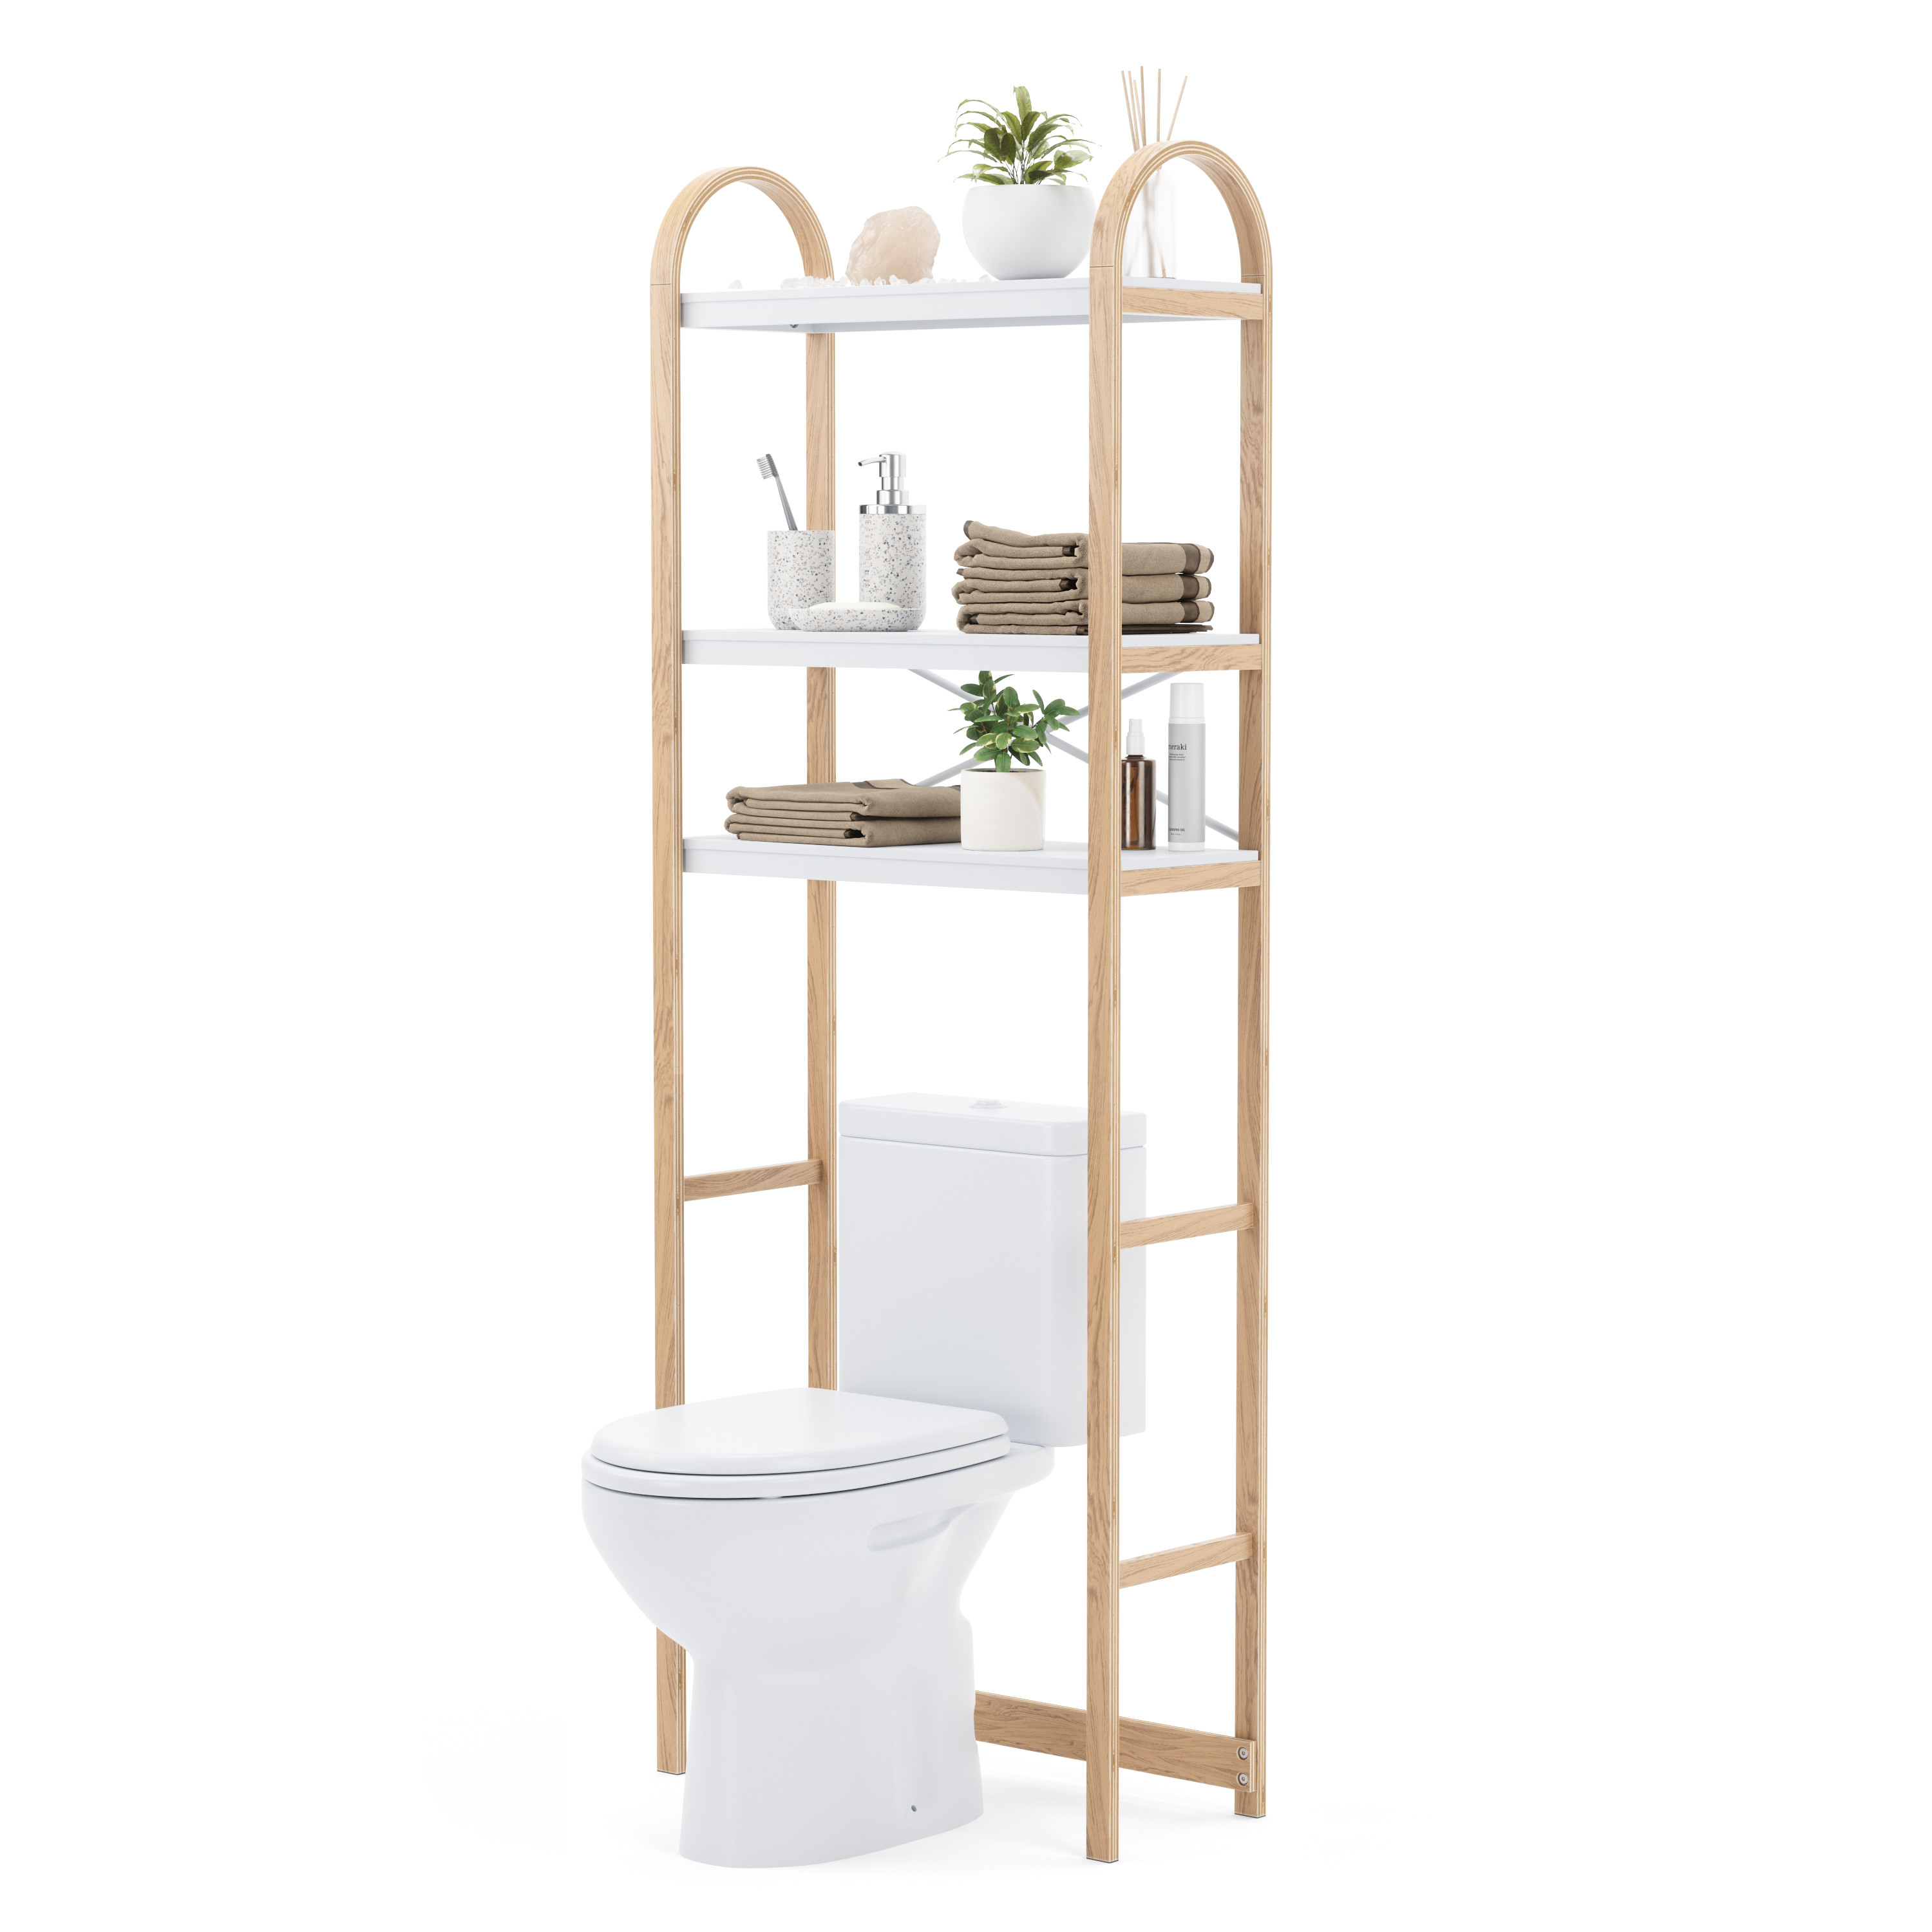 https://www.containerstore.com/catalogimages/483478/19514.jpg